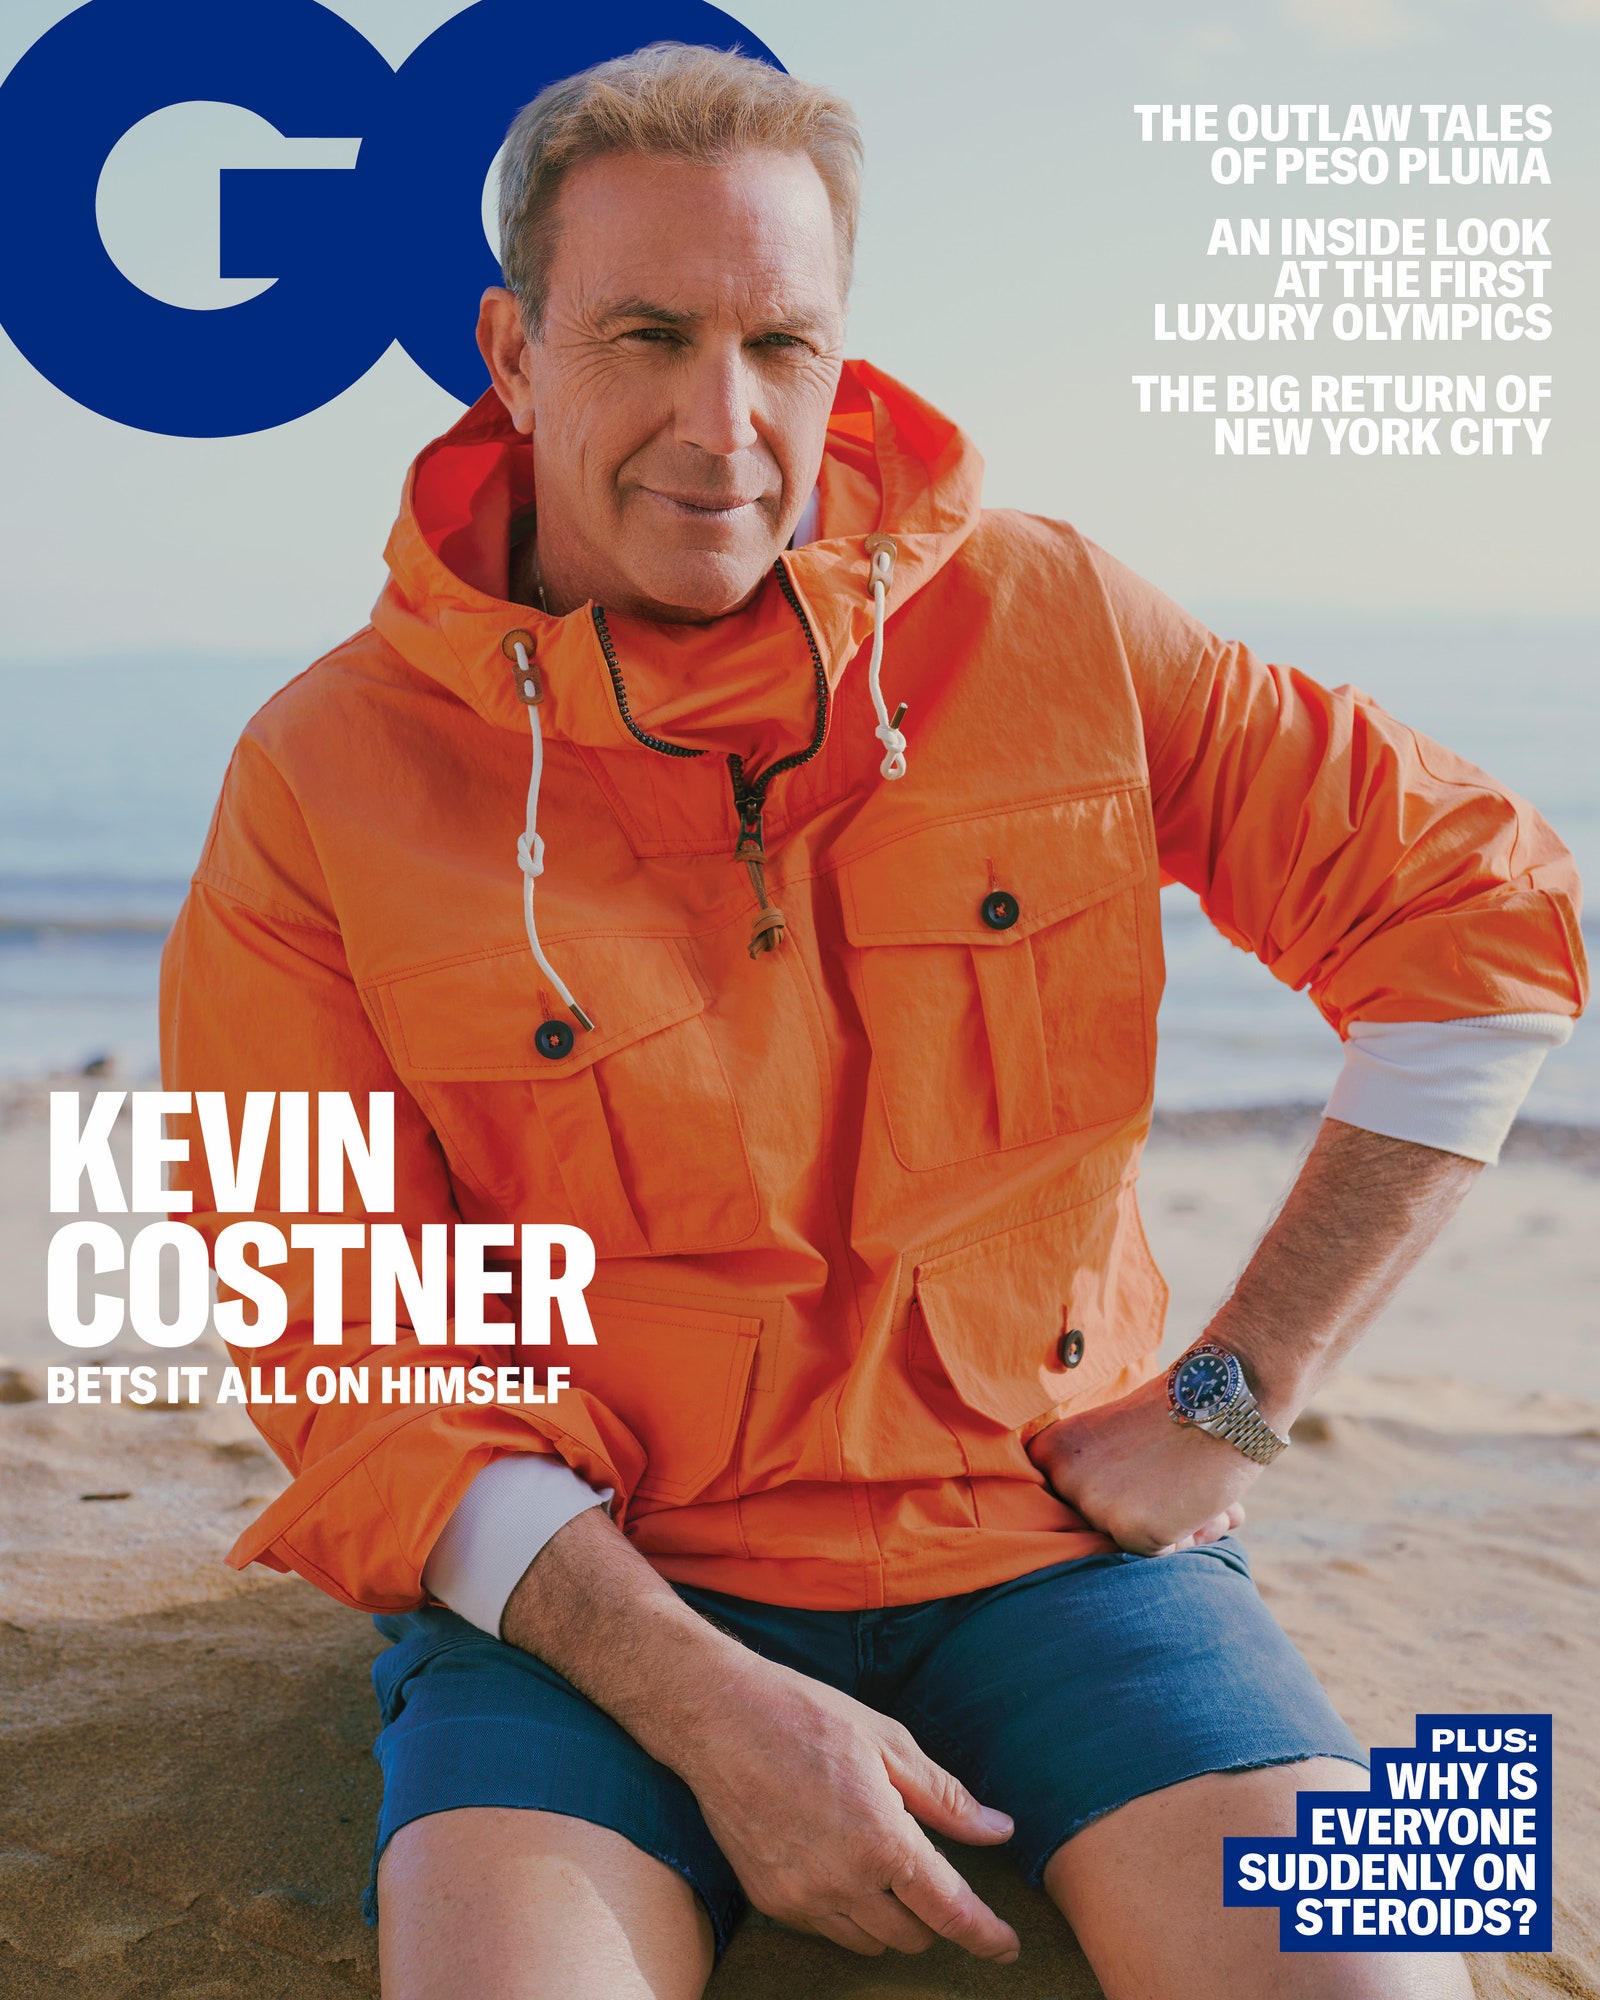 Image may contain Kevin Costner Yellowstone Horizon GQ Cover GQ Summer Issue Clothing Coat Vest Lifejacket Adult Person...